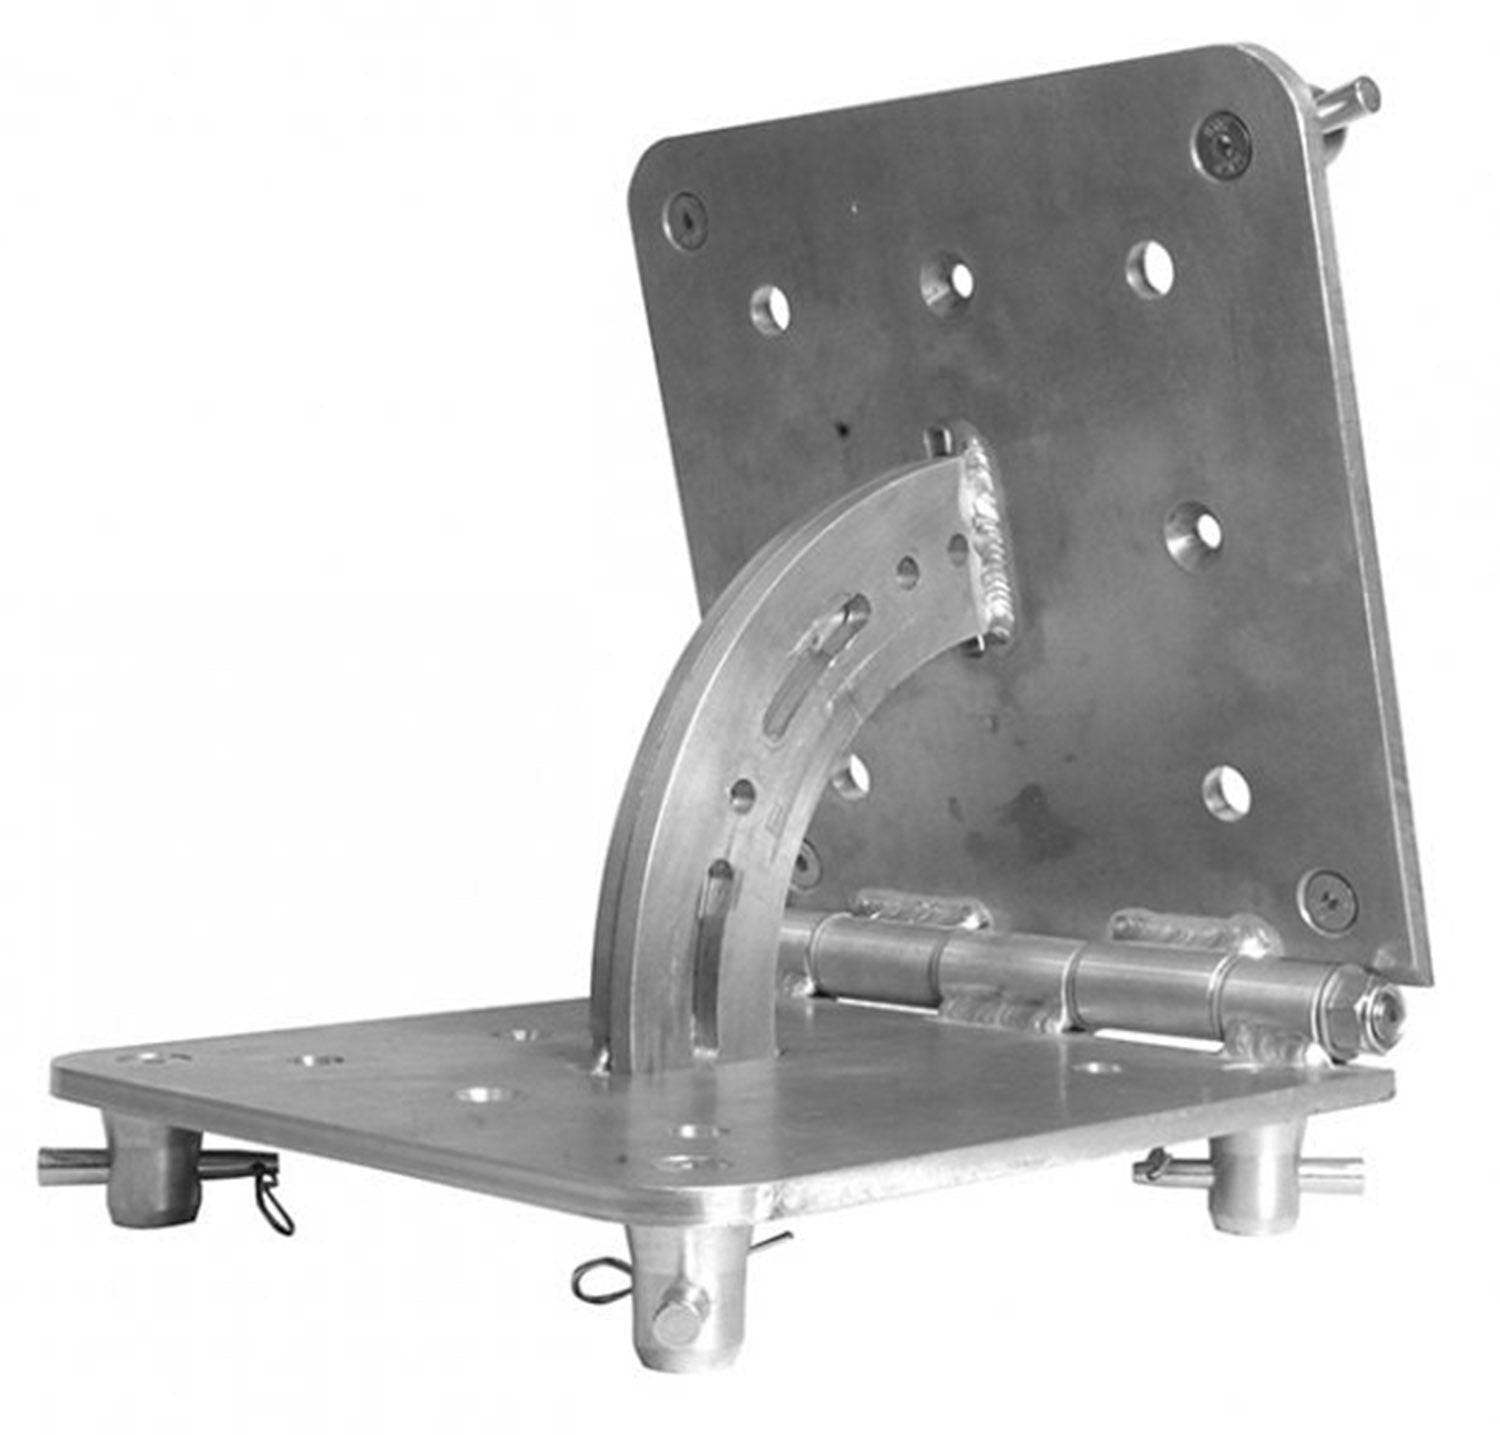 Trusst CT290-4VH, 10-mm Thick Aluminum Versa Hinge For Positioning Of Truss Sections - Hollywood DJ